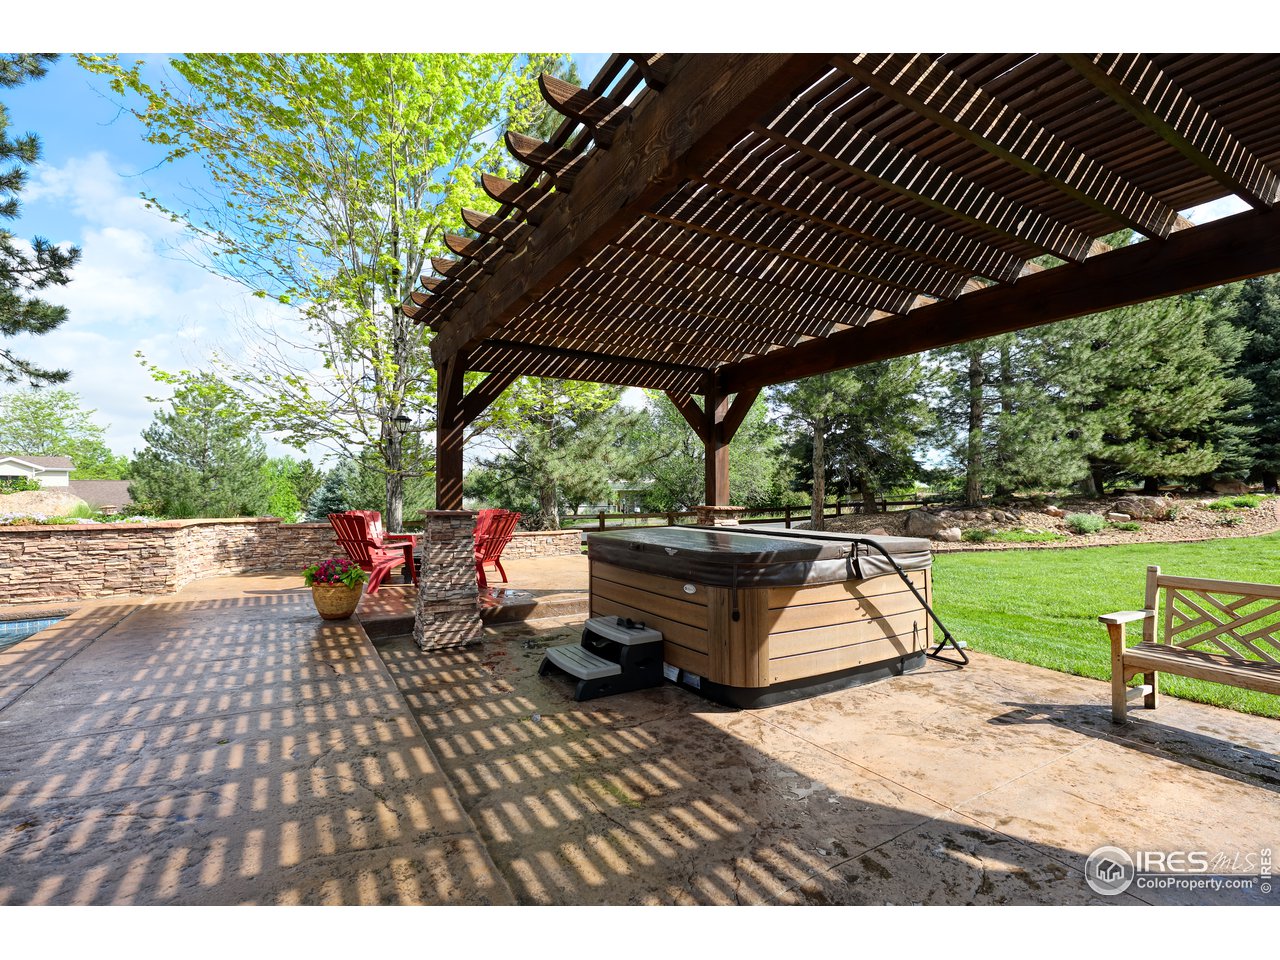 Pergola with hot tub and firepit area